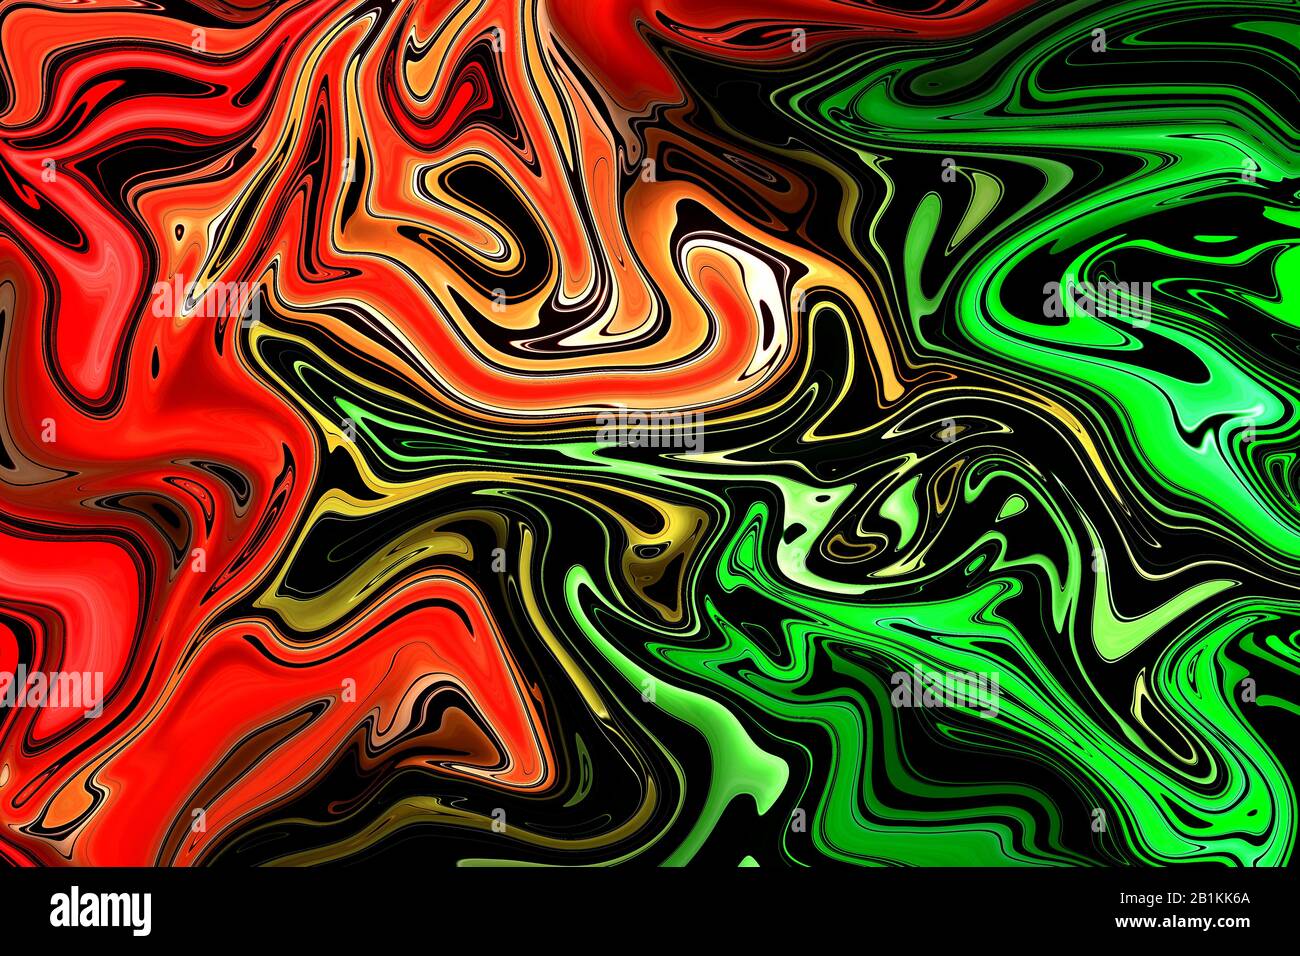 red and green liquid color. abstract background and texture. illustration design. Stock Photo